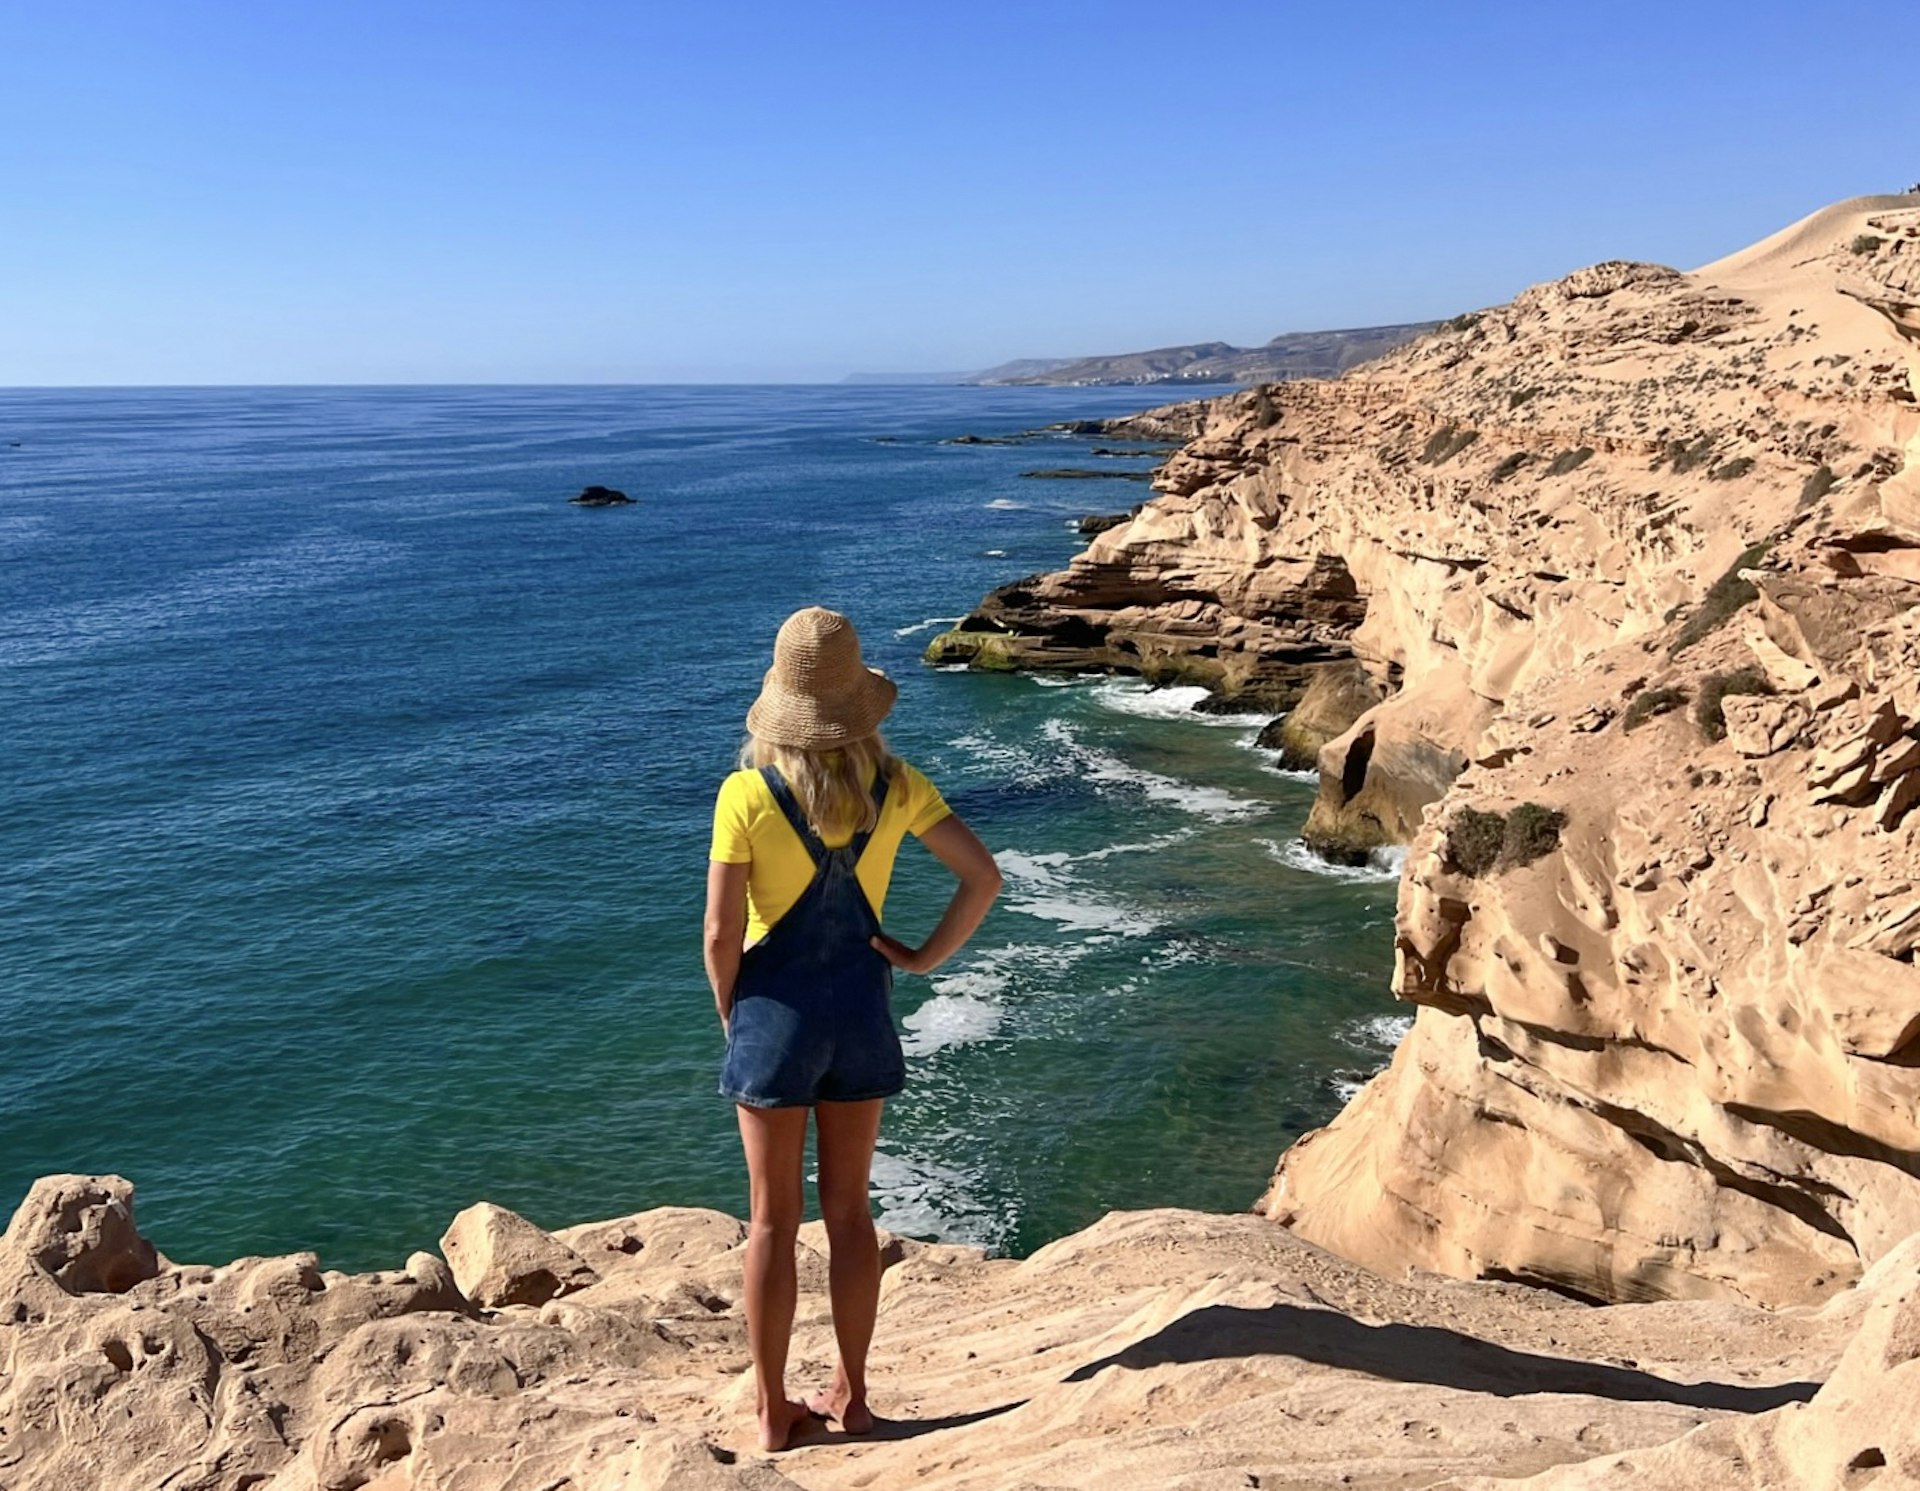 Sally Kirby in Tamri, Morocco, looking out over the rugged Atlantic coast.